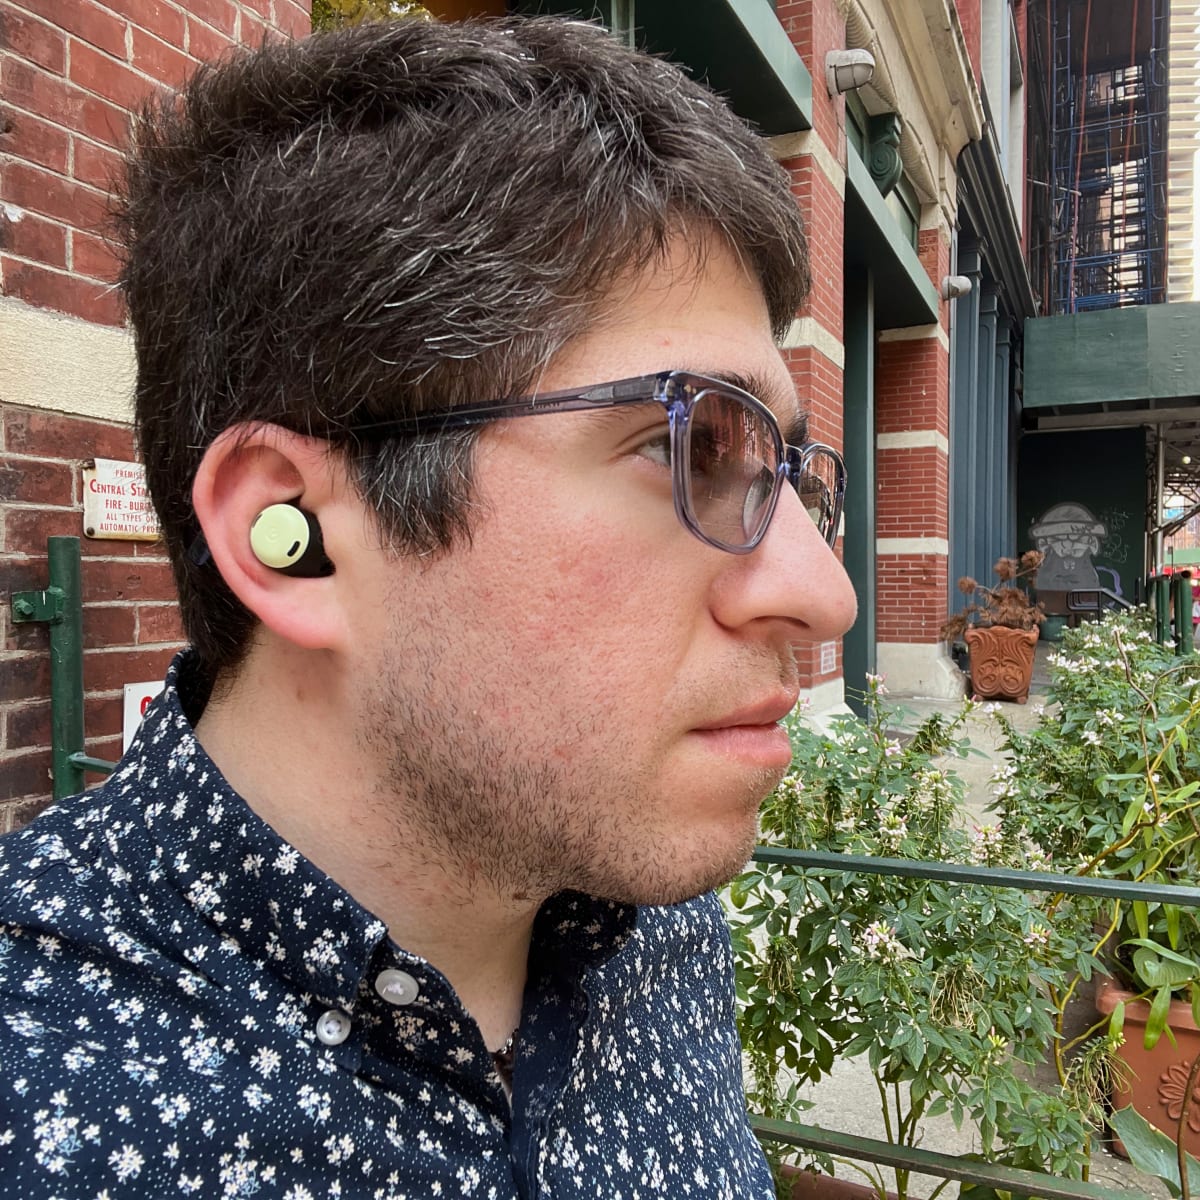 Google Pixel Buds Pro get a great free audio upgrade that shows up AirPods Pro  2